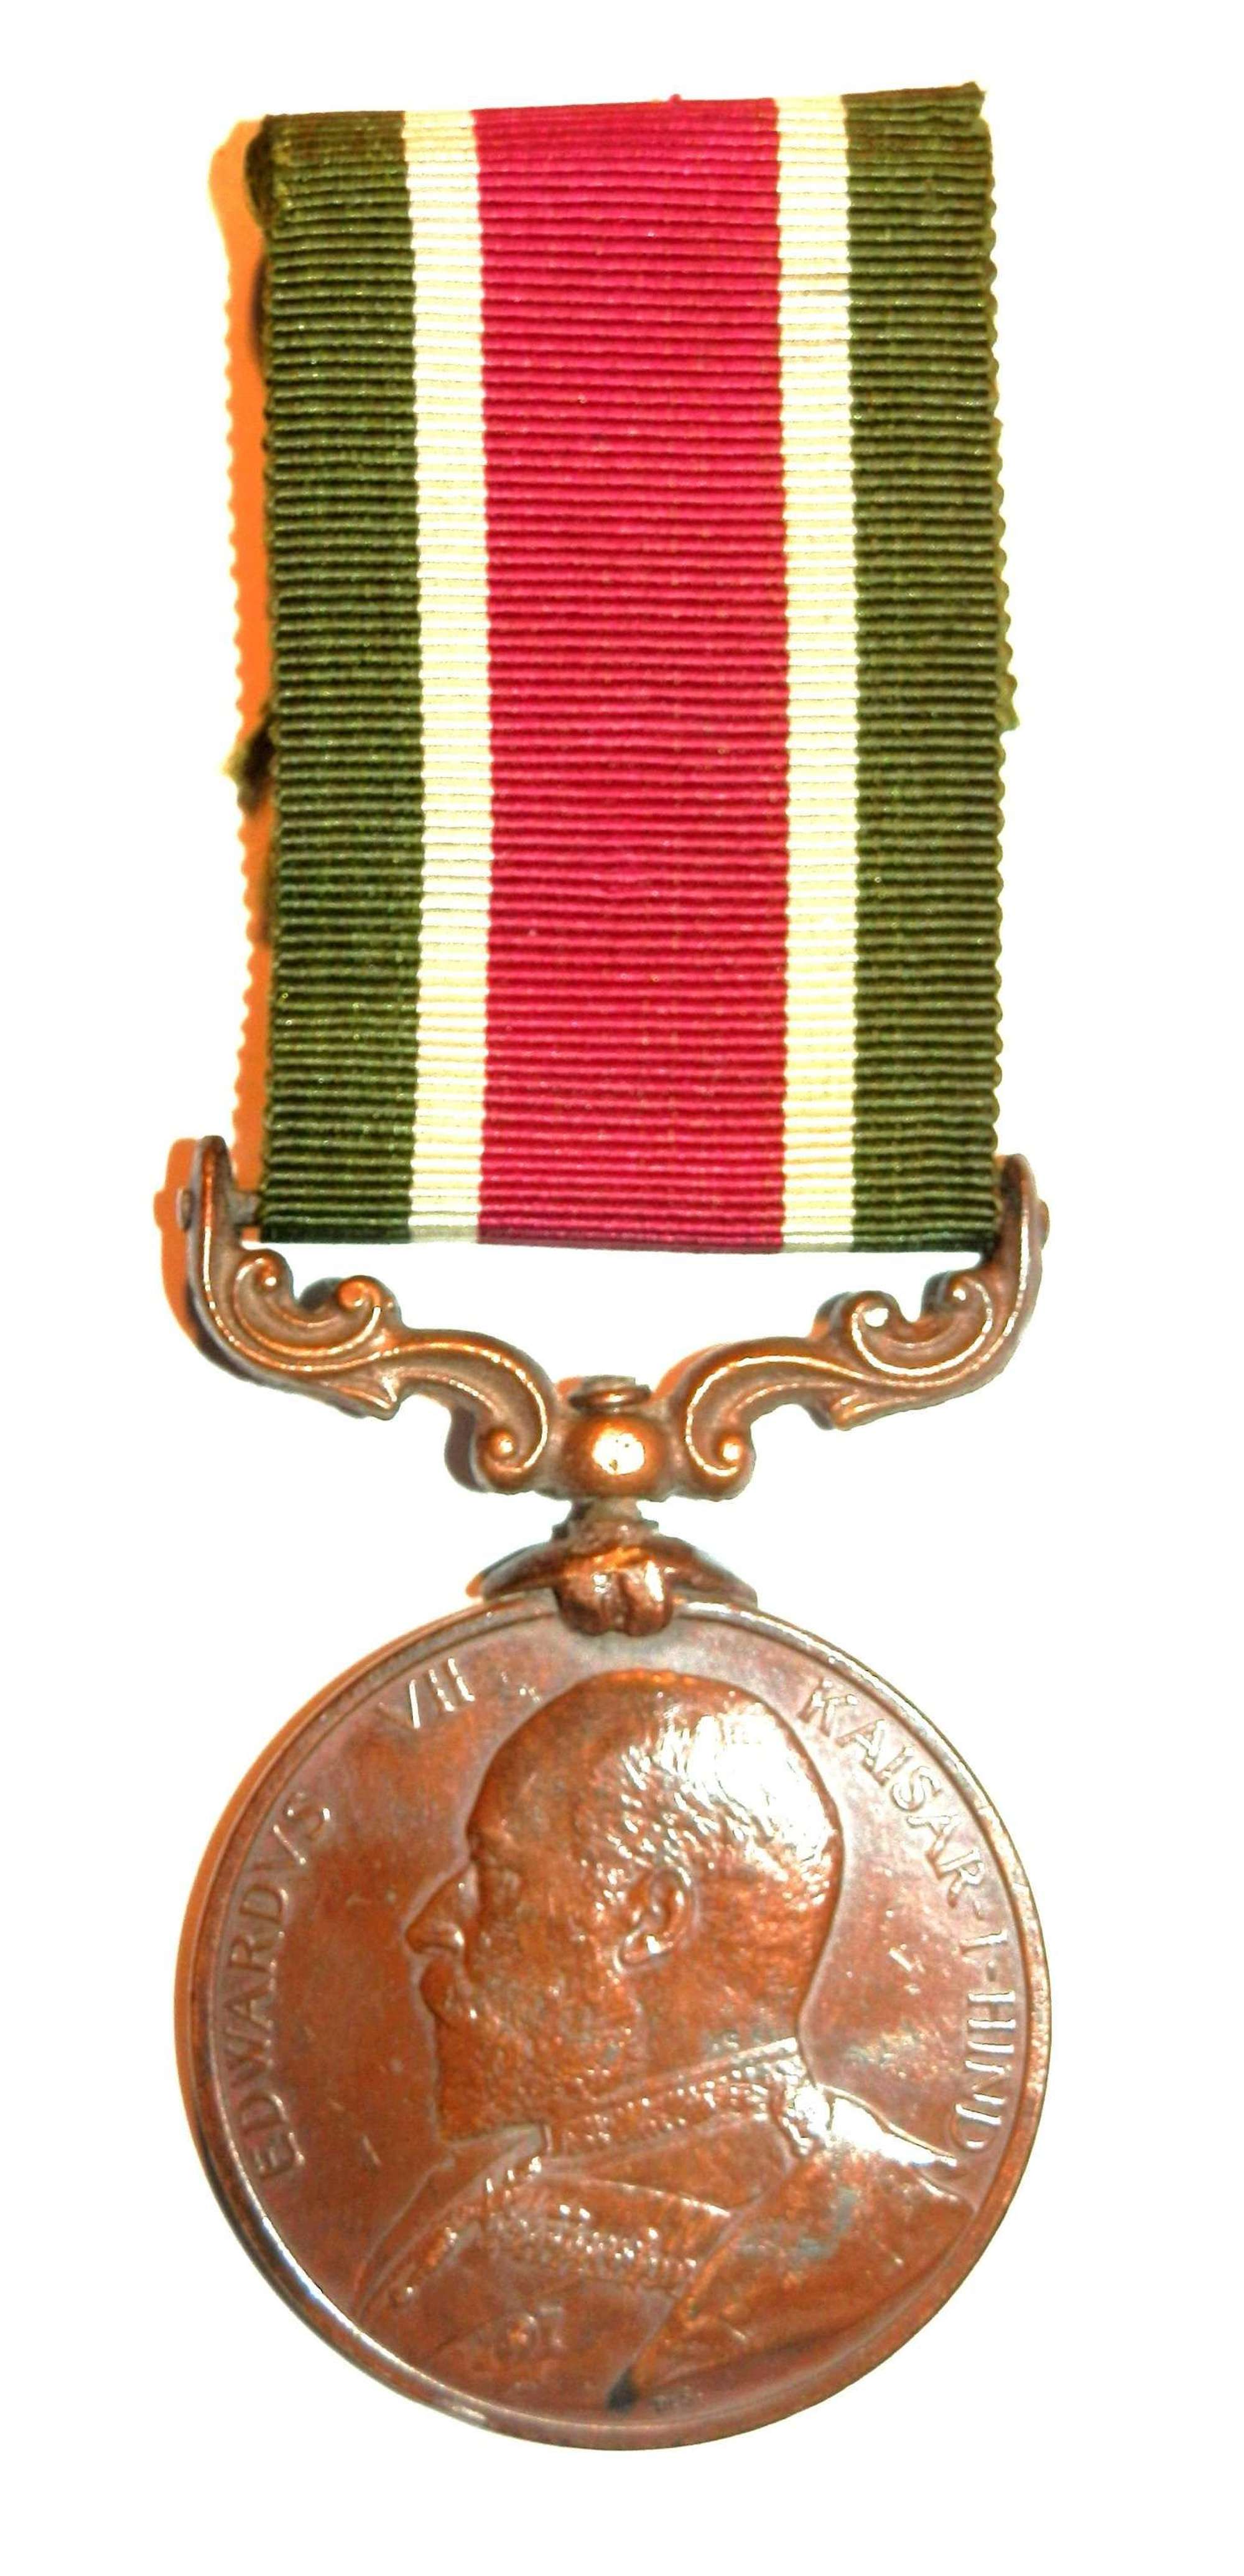 Tibet Medal. Cooly Chandra Bahadur Ghoong. S & T Corps.